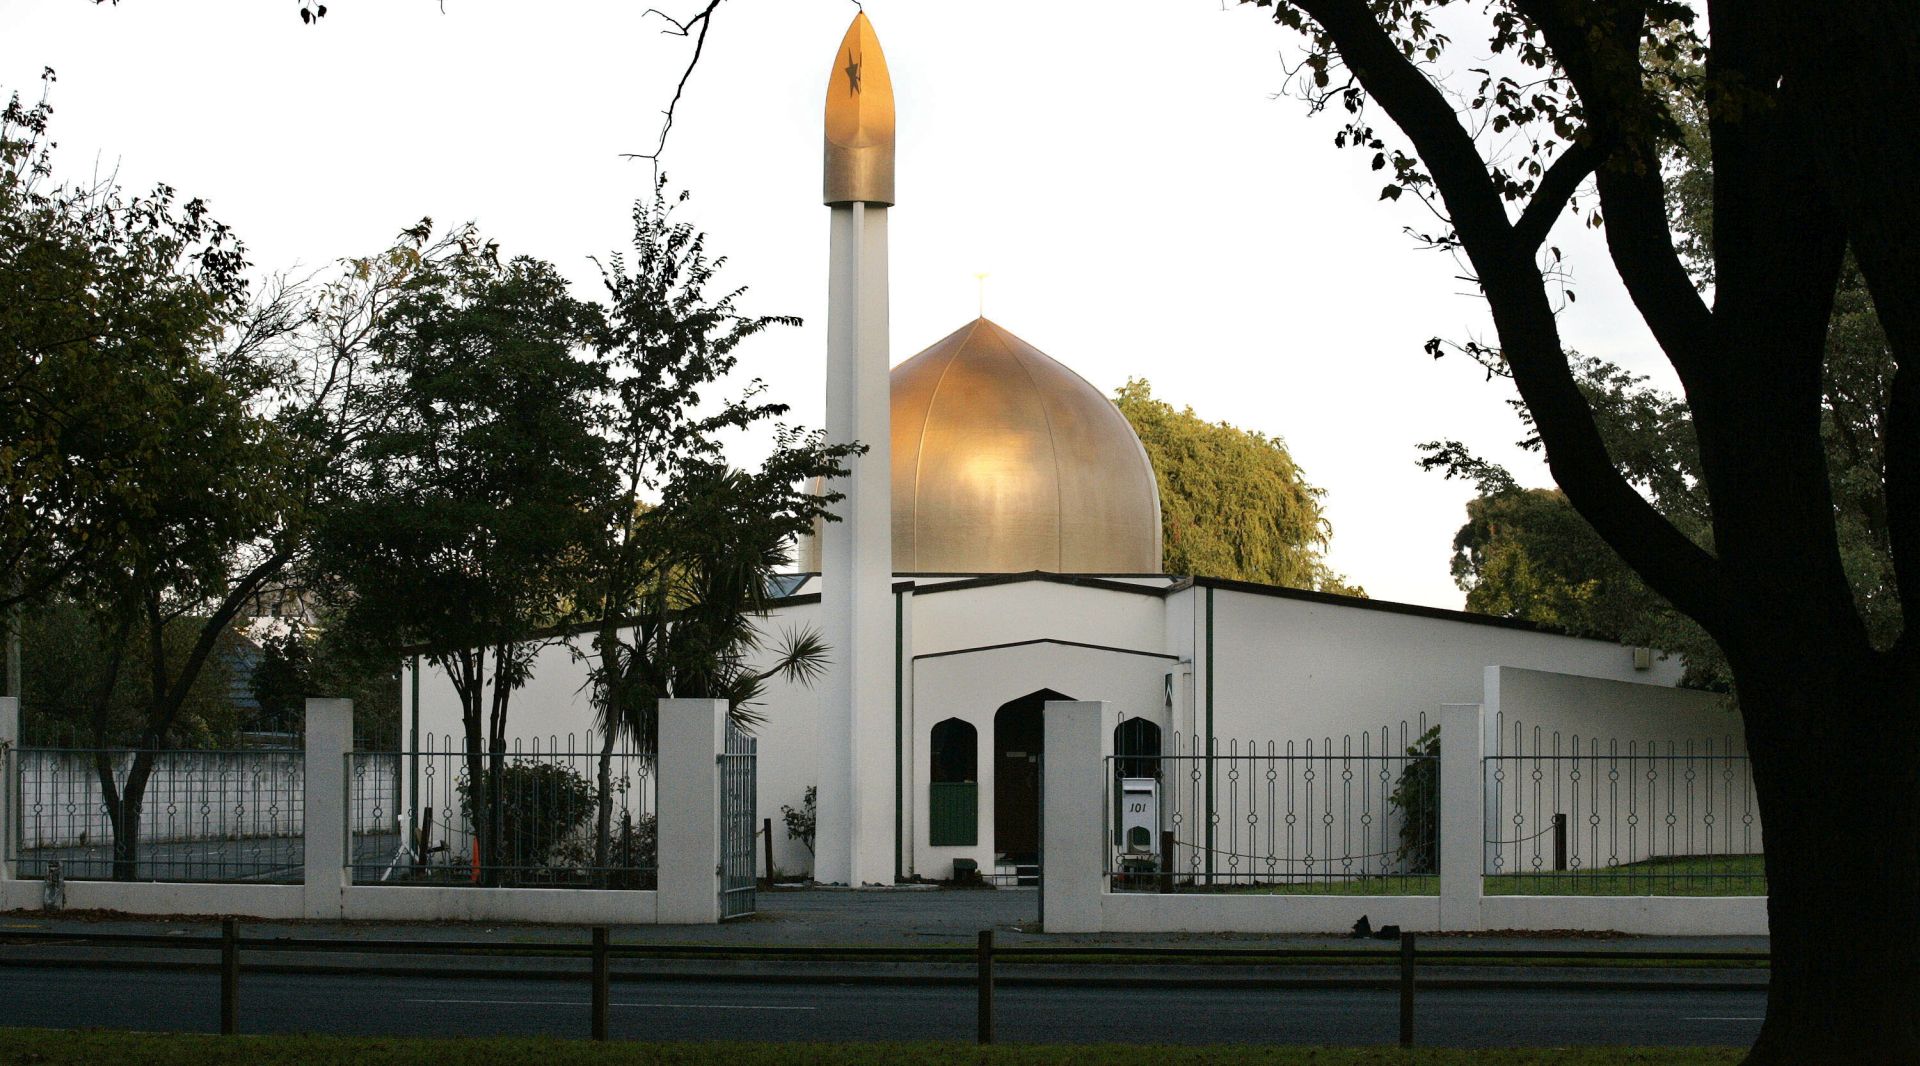 epa07438406 (FILE) - An undated file image shows Masjid Al Noor Mosque on Deans Avenue, the scene of a mass shooting, in Christchurch, New Zealand, 15 March 2019. According to media reports on 15 March 2019, at least one gunman opened fire at around 1:40 pm local time after walking into the Masjid Al Noor Mosque, killing and wounding several of people. Armed police officers were deployed to the scene, along with emergency service personnel. There are also confirmed reports of a shooting at a second mosque in Christchurch, and both incidents have left at least 40 people dead and more than 20 people seriously wounded. Four people are in custody in connection with the shootings.  EPA/Martin Hunter NEW ZEALAND OUT